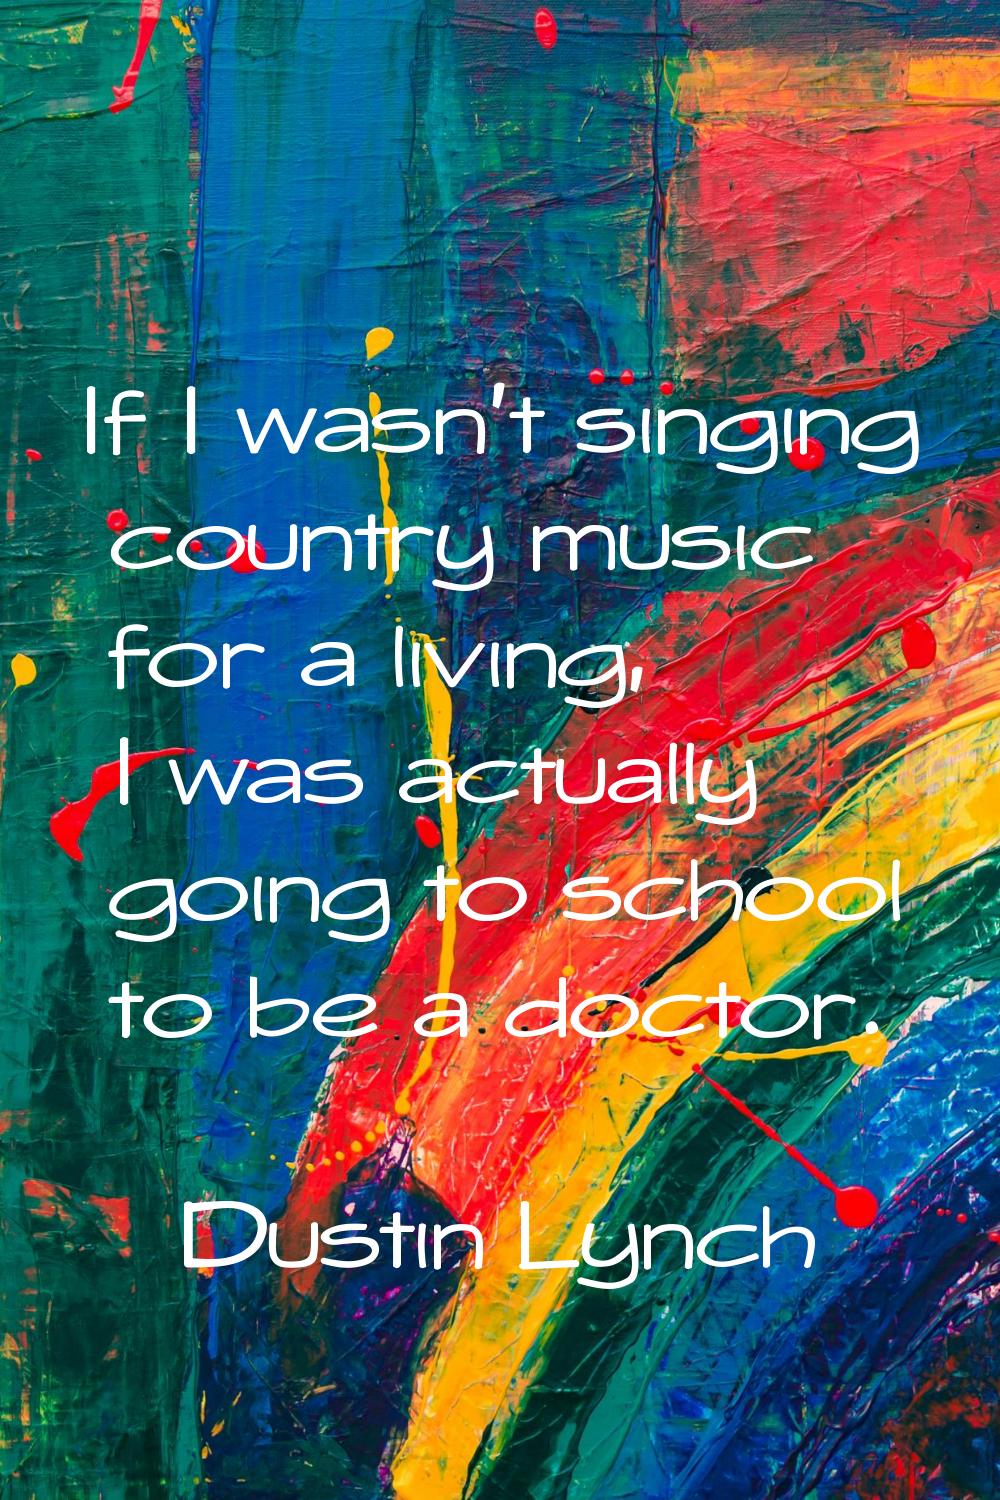 If I wasn't singing country music for a living, I was actually going to school to be a doctor.